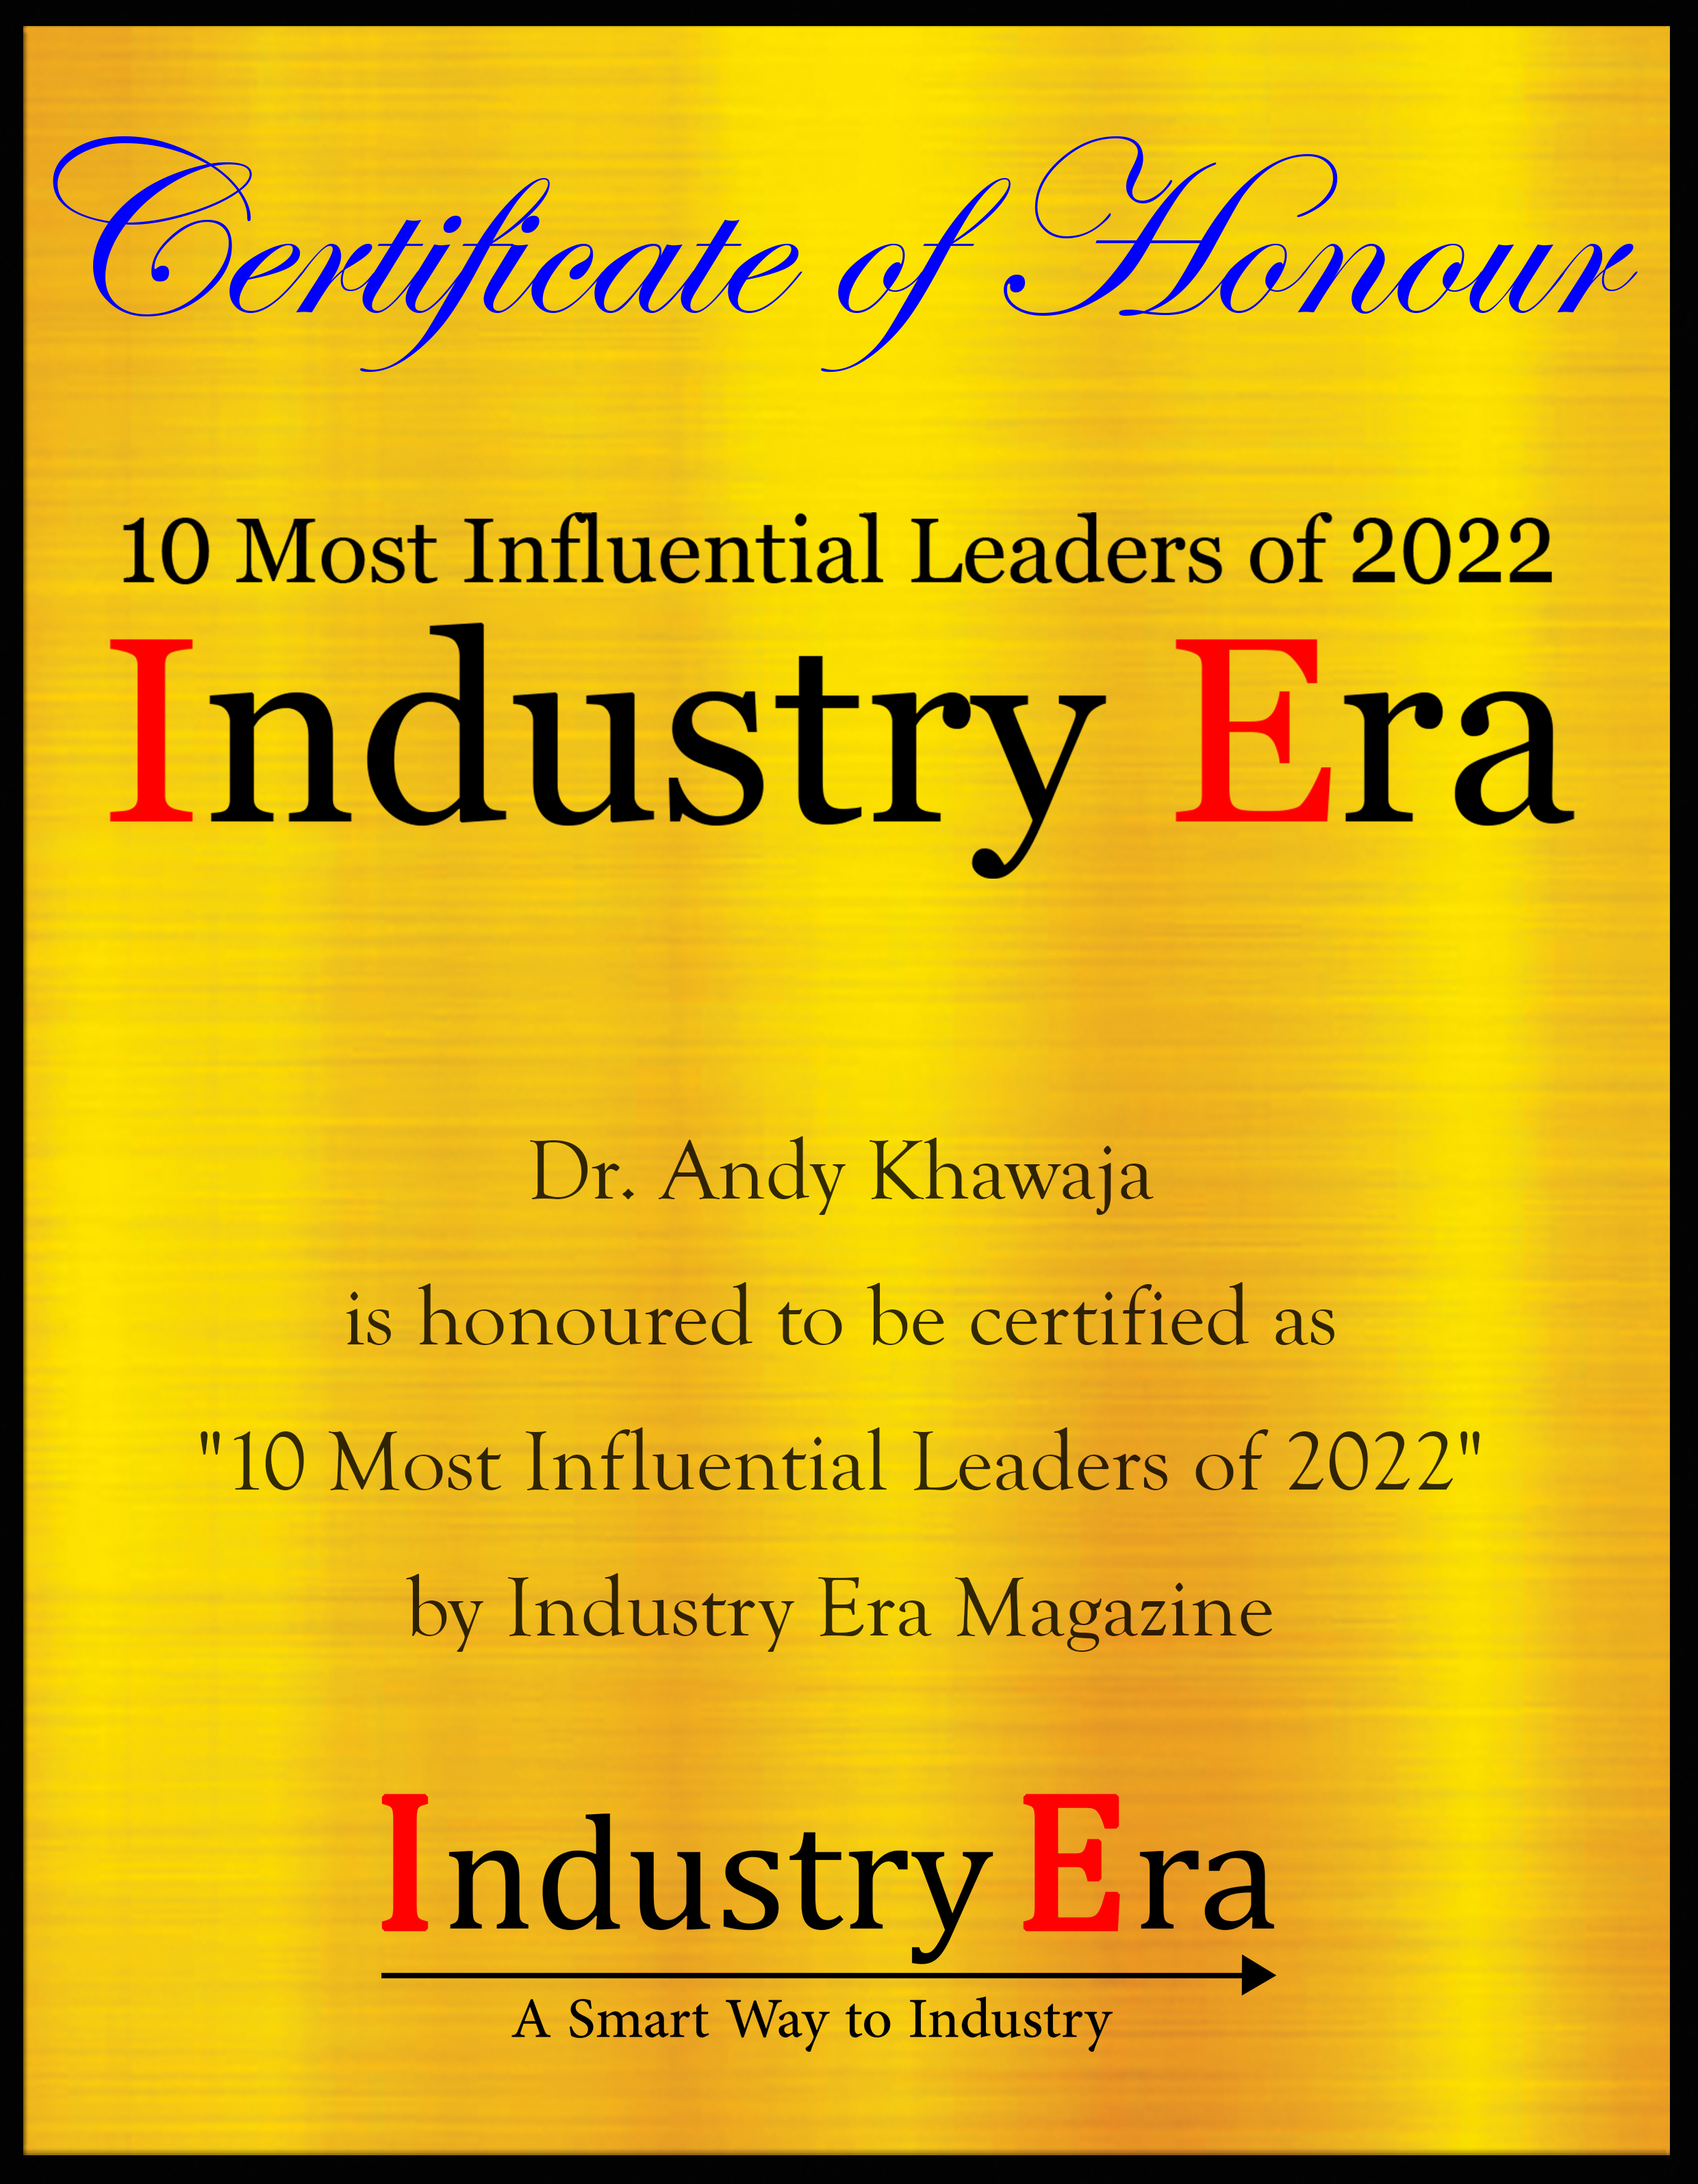 Dr. Andy Khawaja, Founder of Allied Wallet Certificate